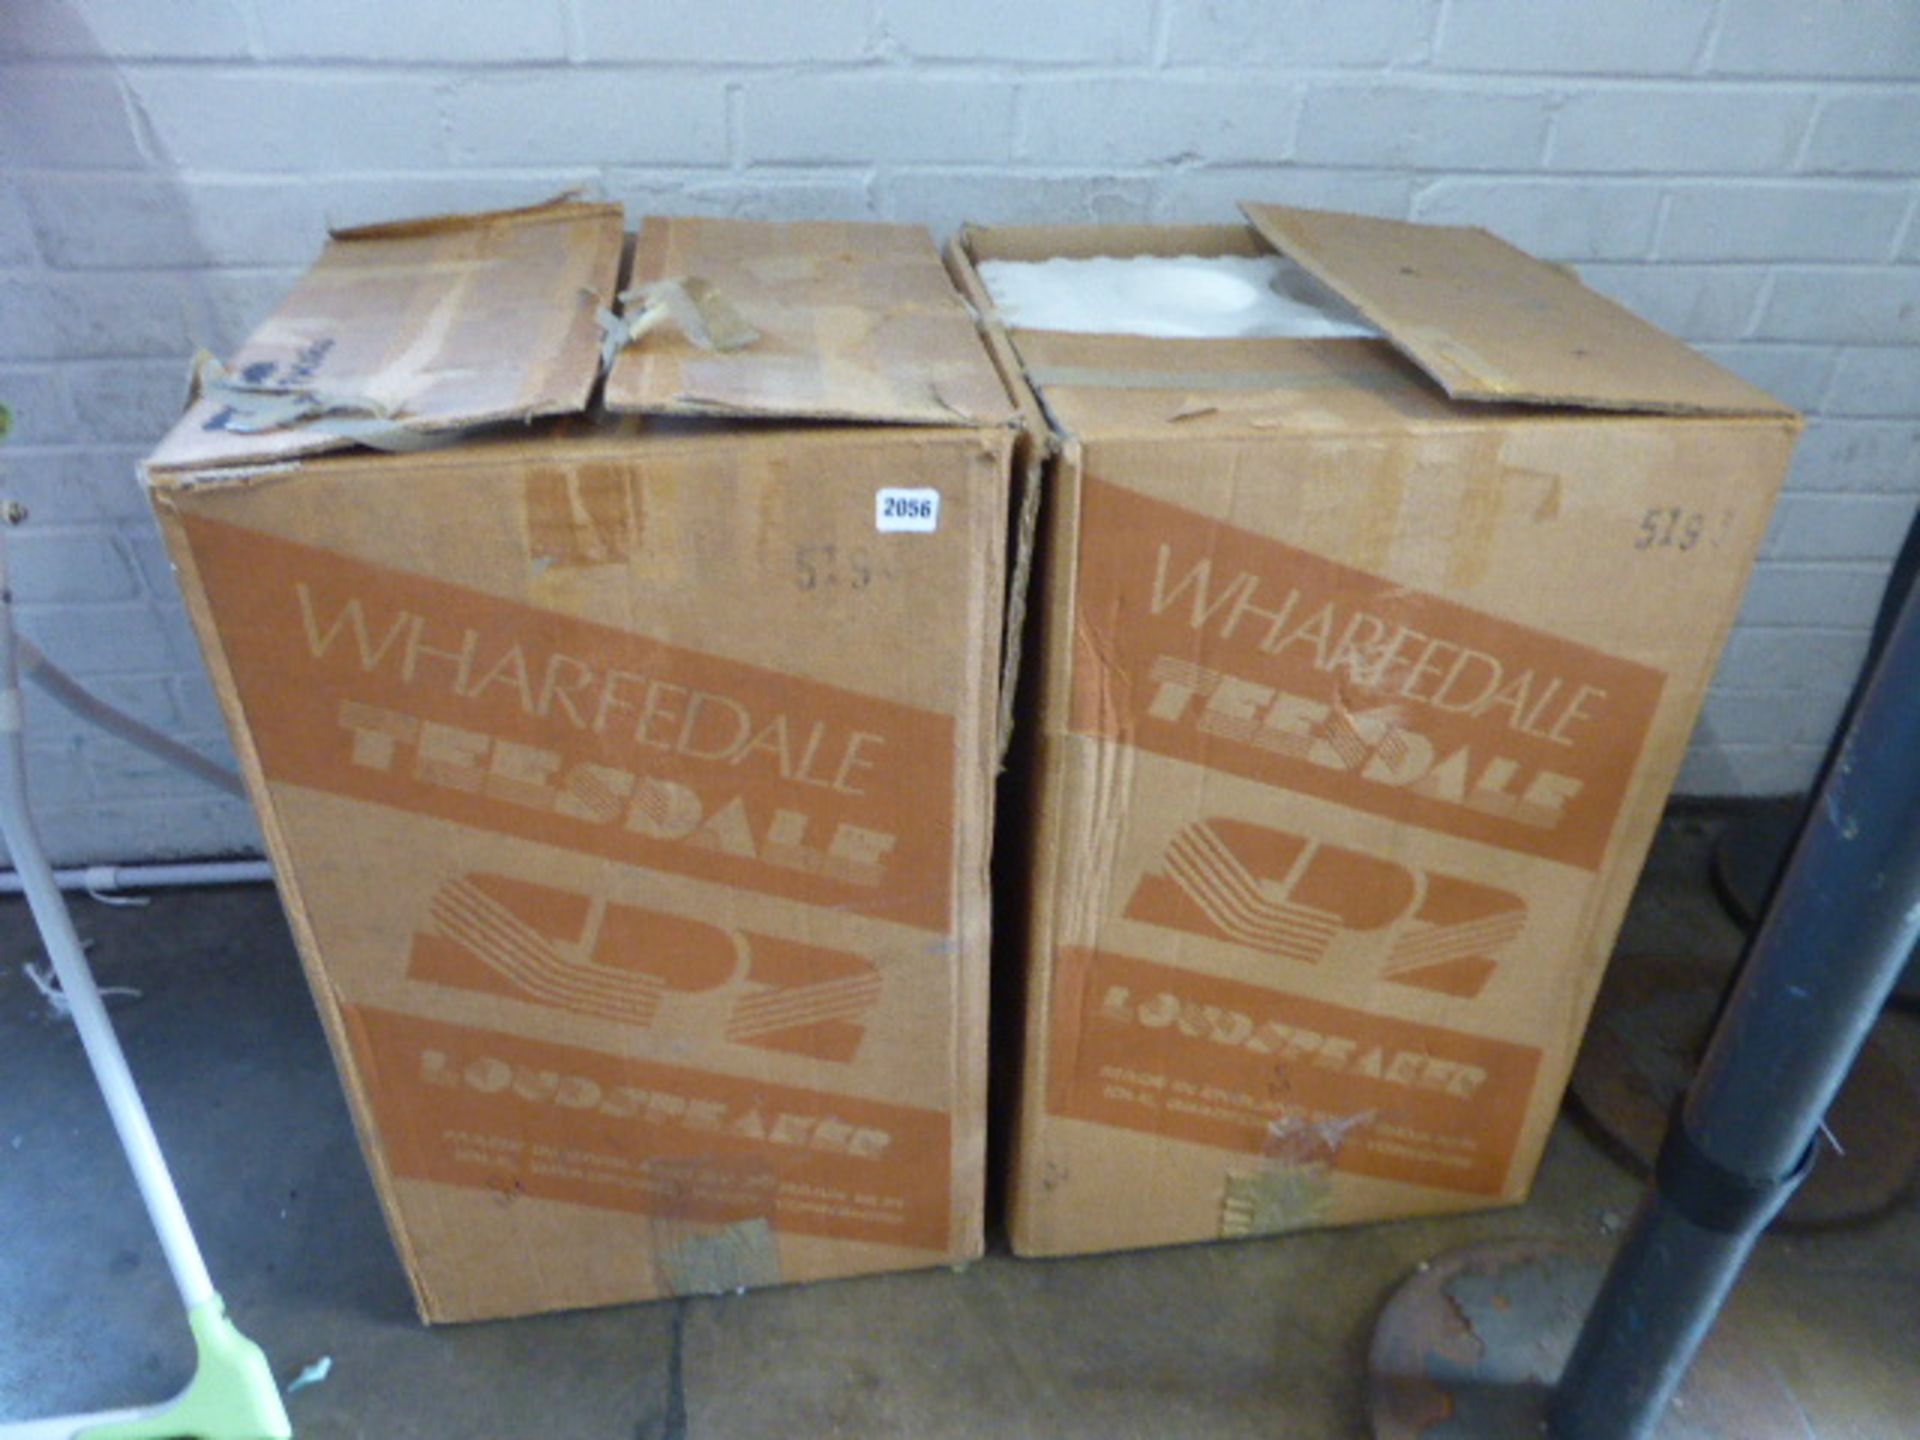 Two Wharfedale Teesdale boxed speakers